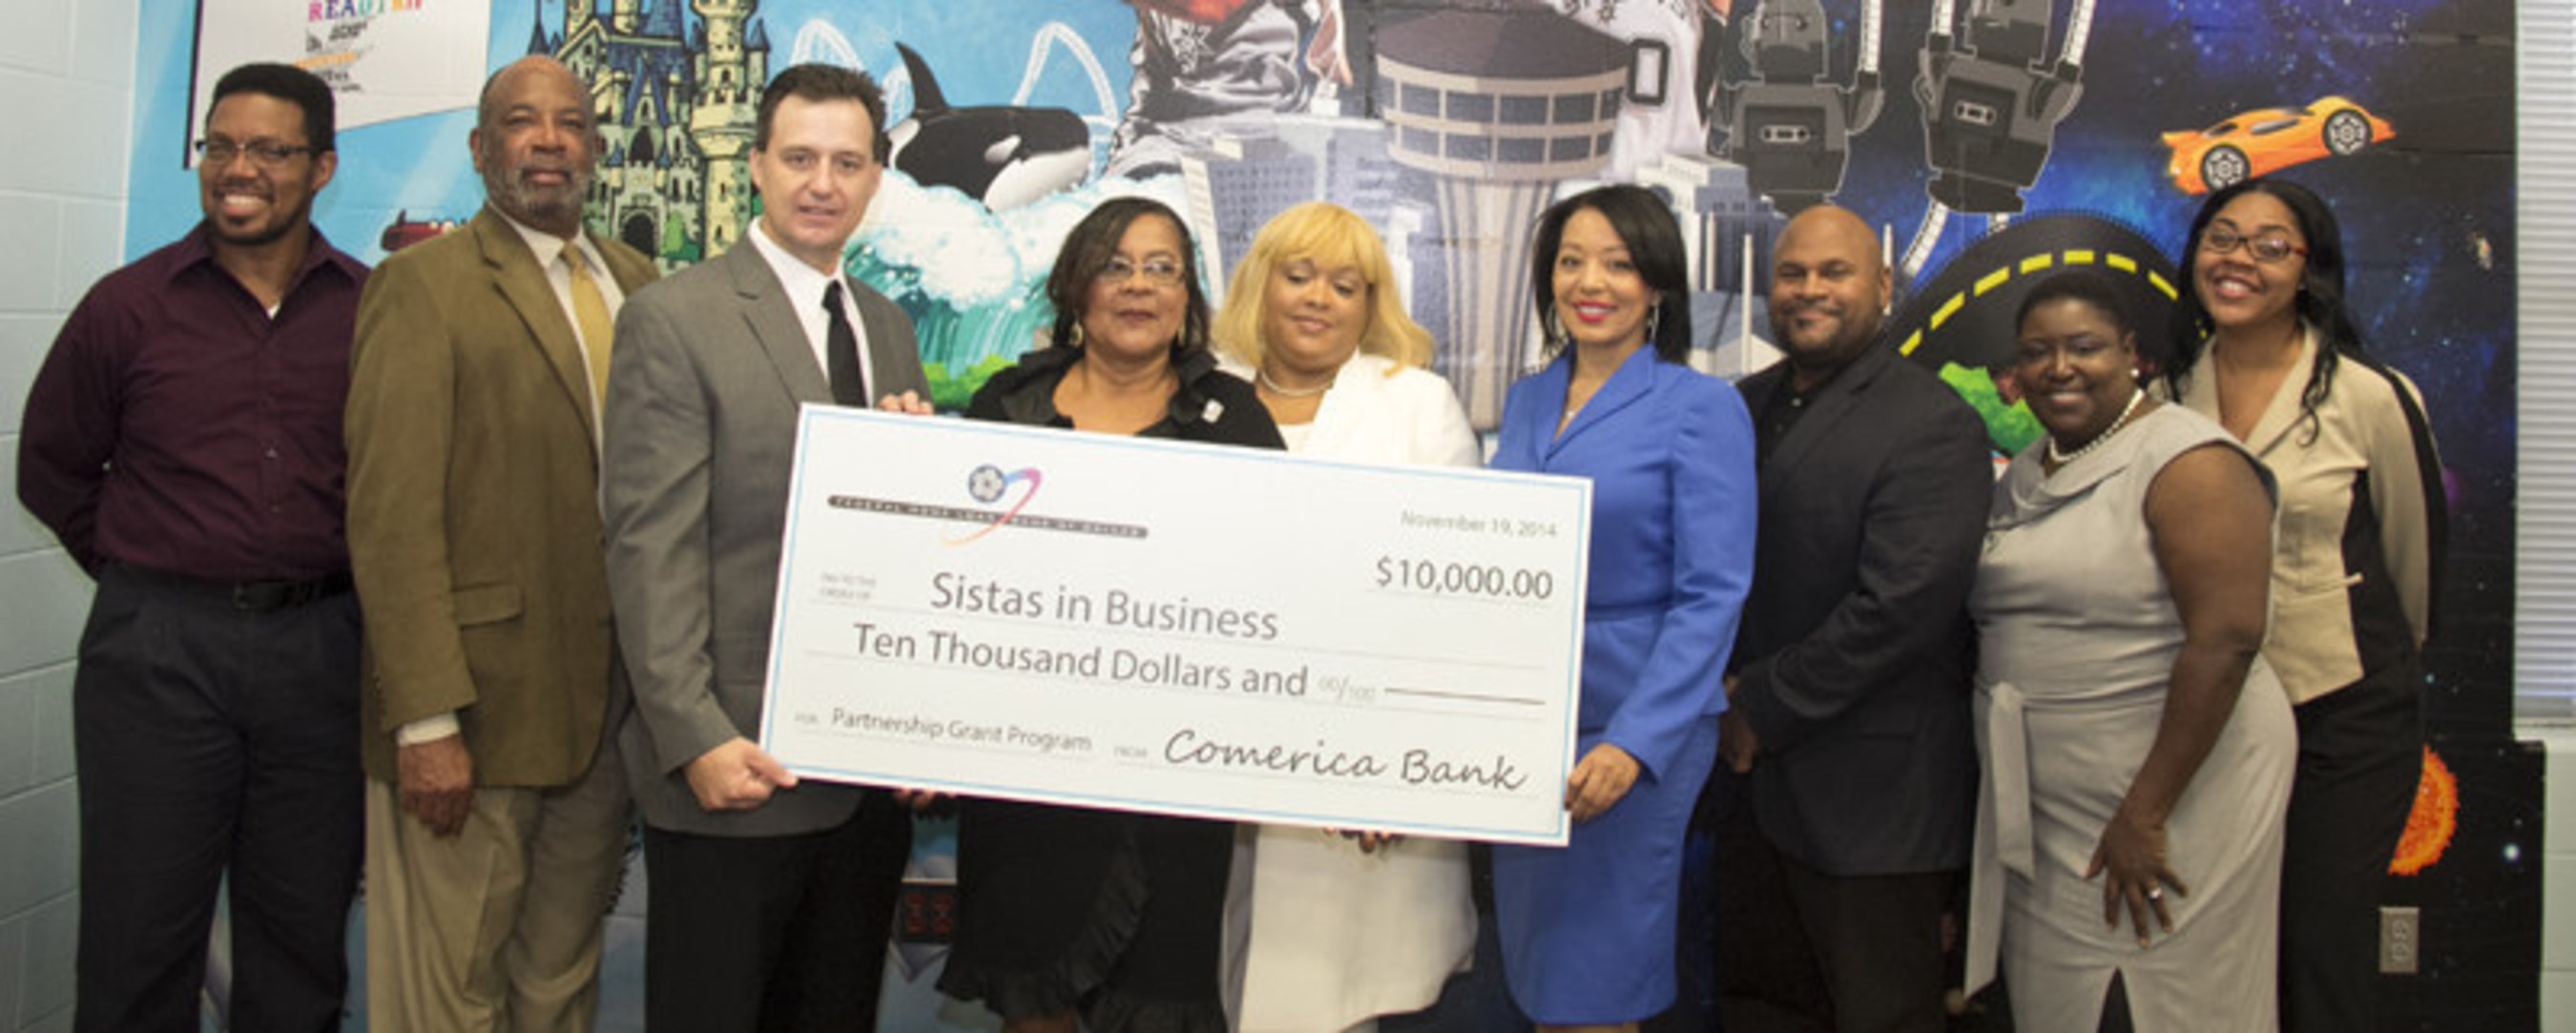 Sistas in Business, a nonprofit that helps African-American women business owners, received a $10,000 Partnership Grant Program (PGP) award last week from Comerica Bank and the Federal Home Loan Bank of Dallas (FHLB Dallas). The PGP grant will be used to make technical assistance available to small business start-ups and provide materials for its financial literacy programs.